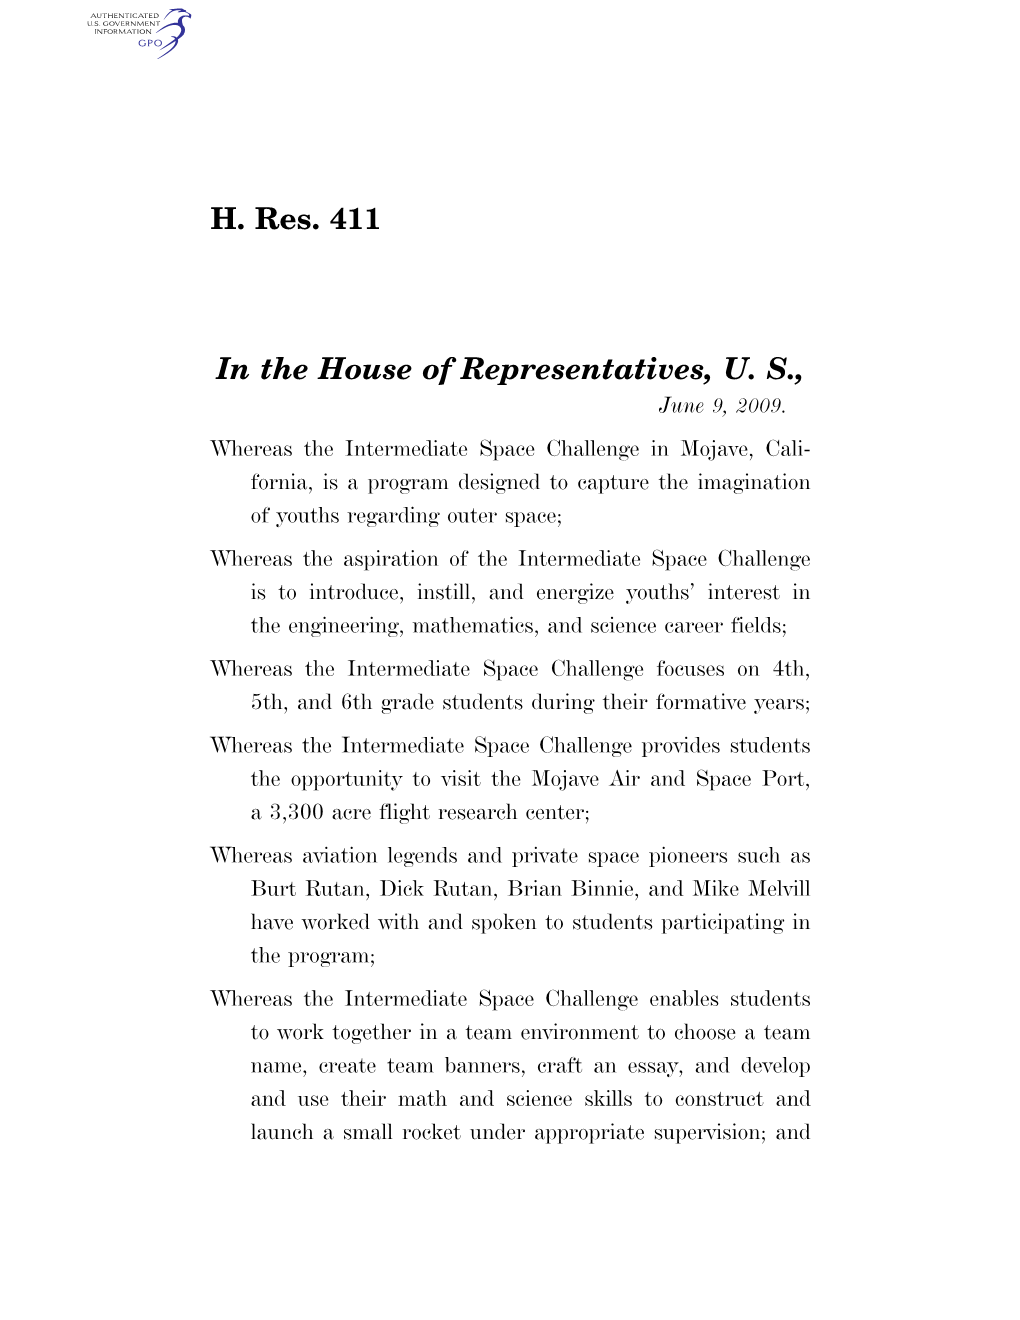 H. Res. 411 in the House of Representatives, U